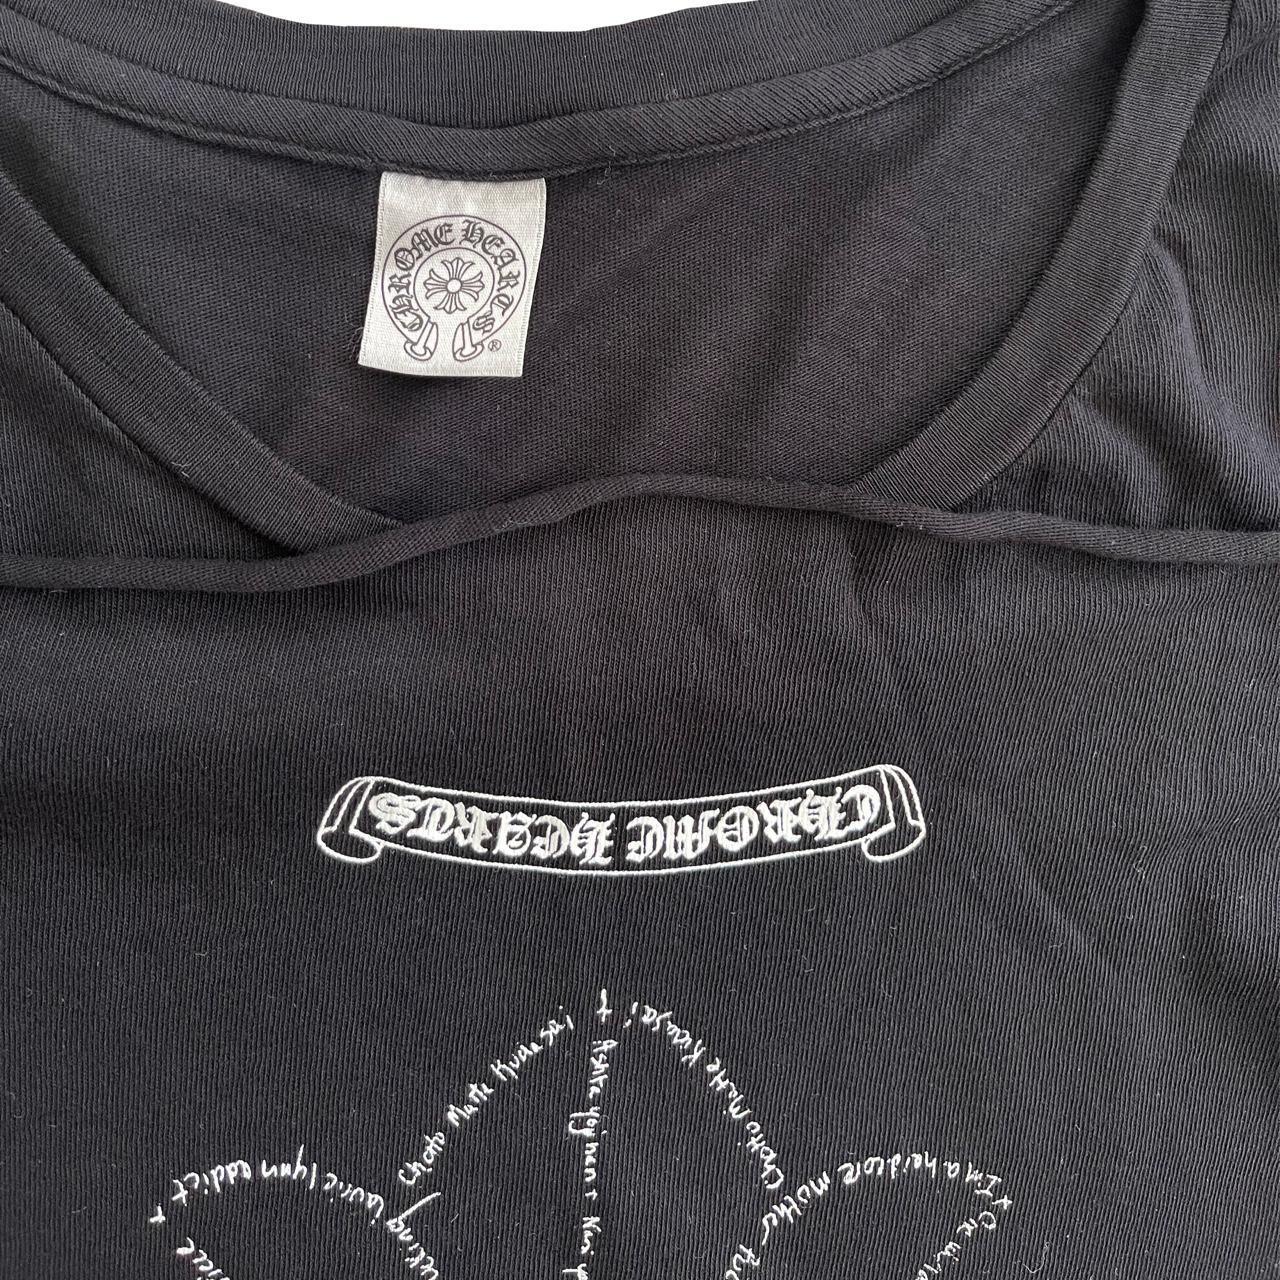 Chrome Hearts T-Shirt - Known Source